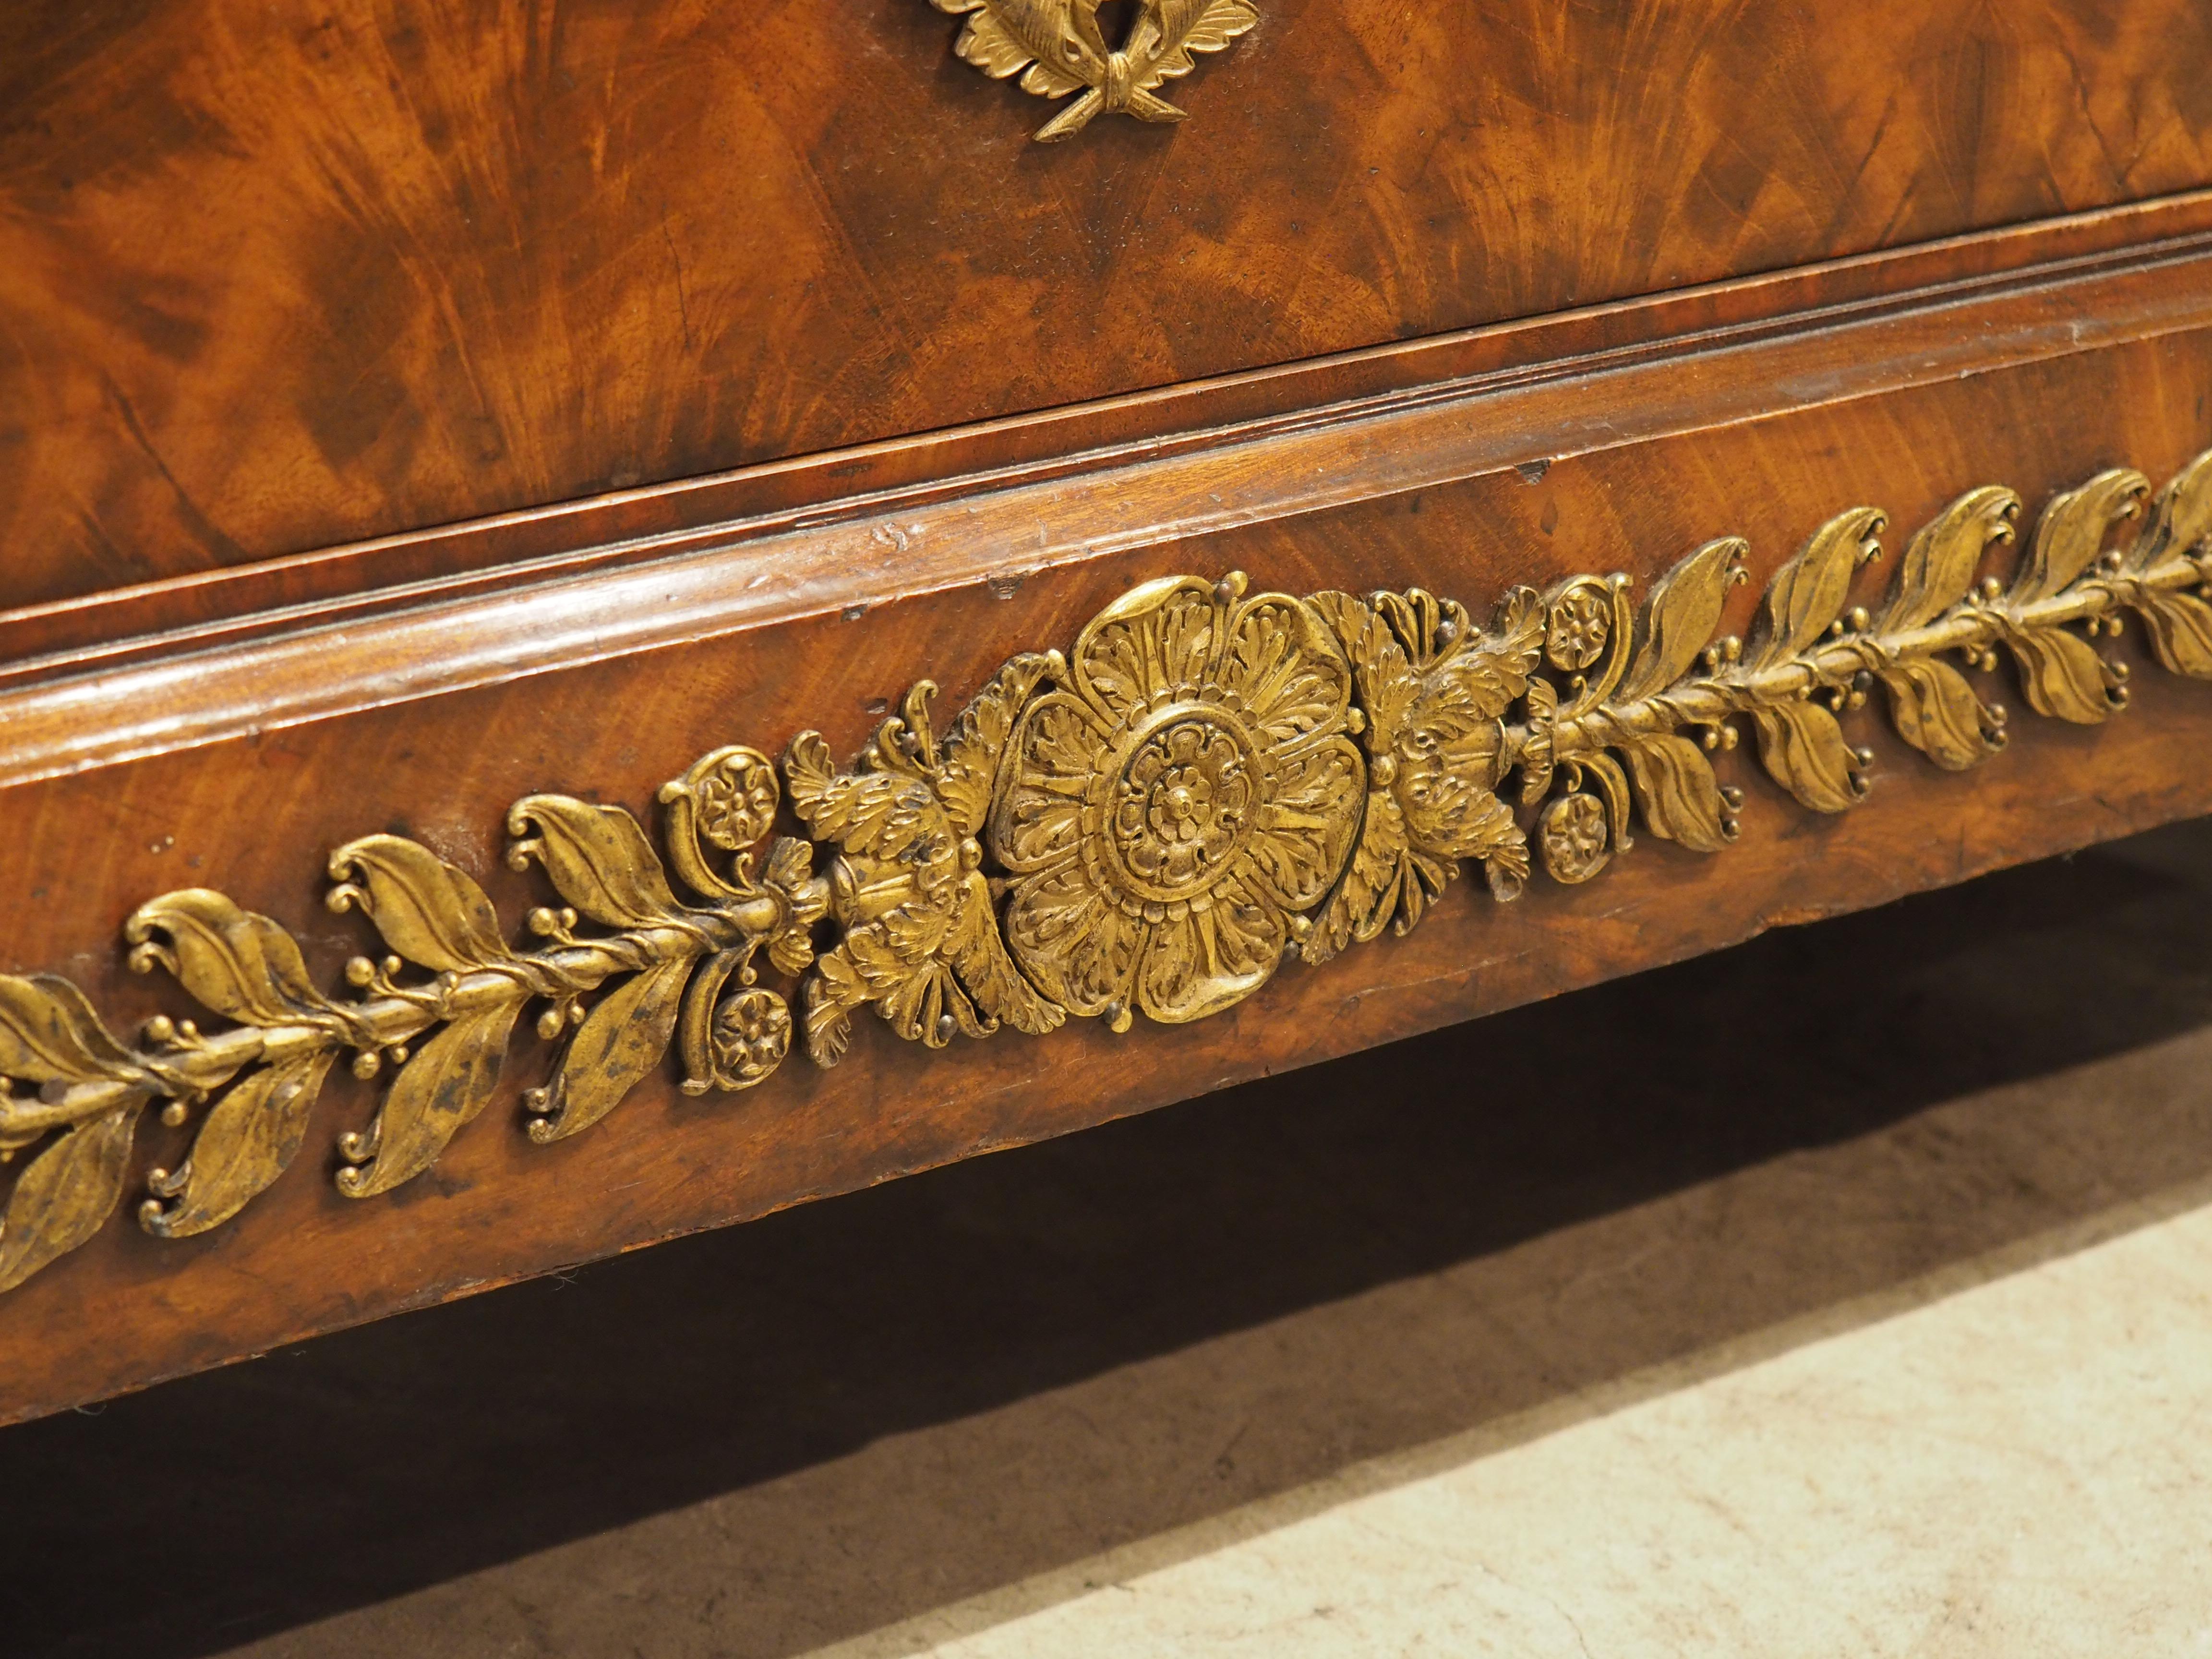 Circa 1820 French Restauration Commode in Flame Mahogany, Gilt Bronze Hardware For Sale 11